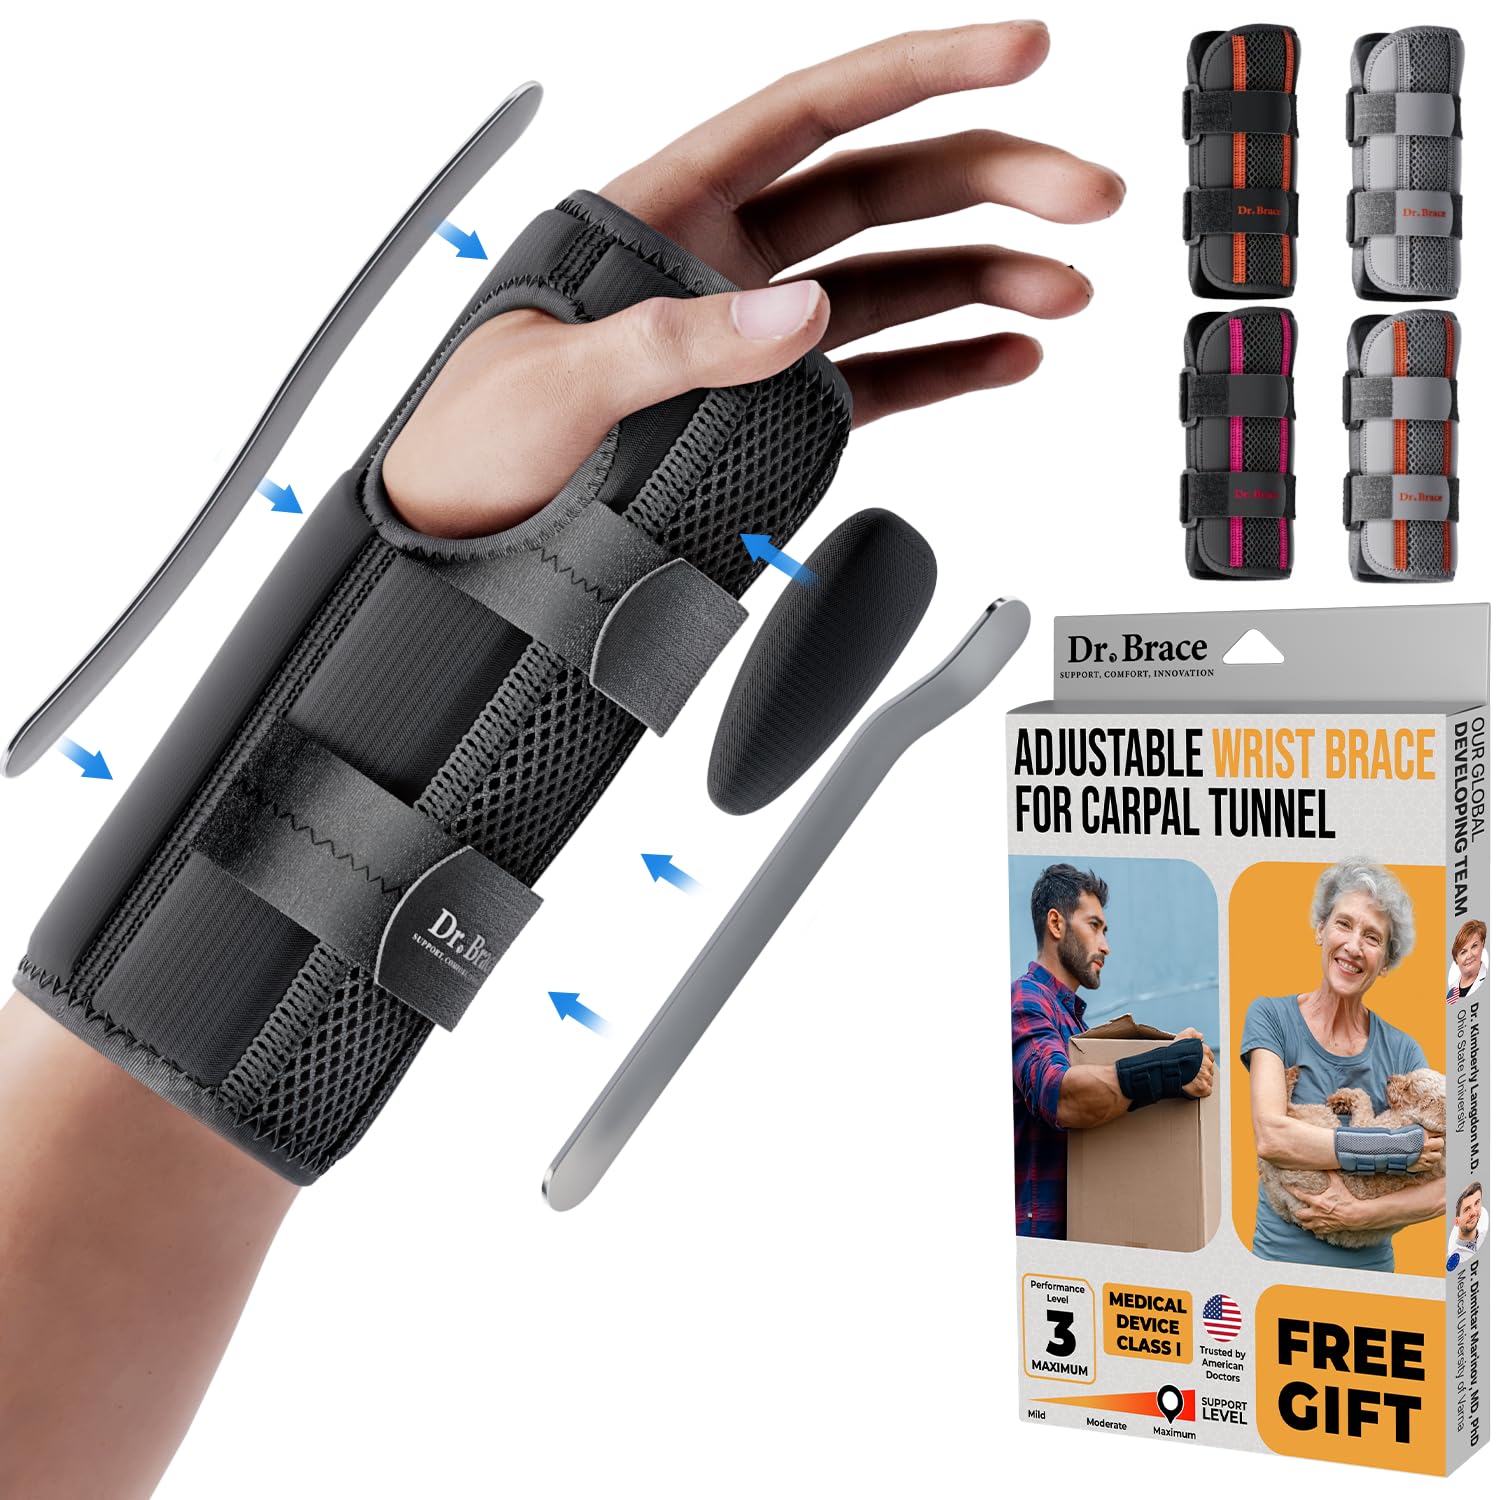 Dr.Brace Adjustable Wrist Brace Night Support for Carpal Tunnel, Doctor Developed, Upgraded with Double Splint & Therapeutic Cushion,Hand Brace for Pain Relief,Injuries,Sprains (L/XL Right Hand, Black)